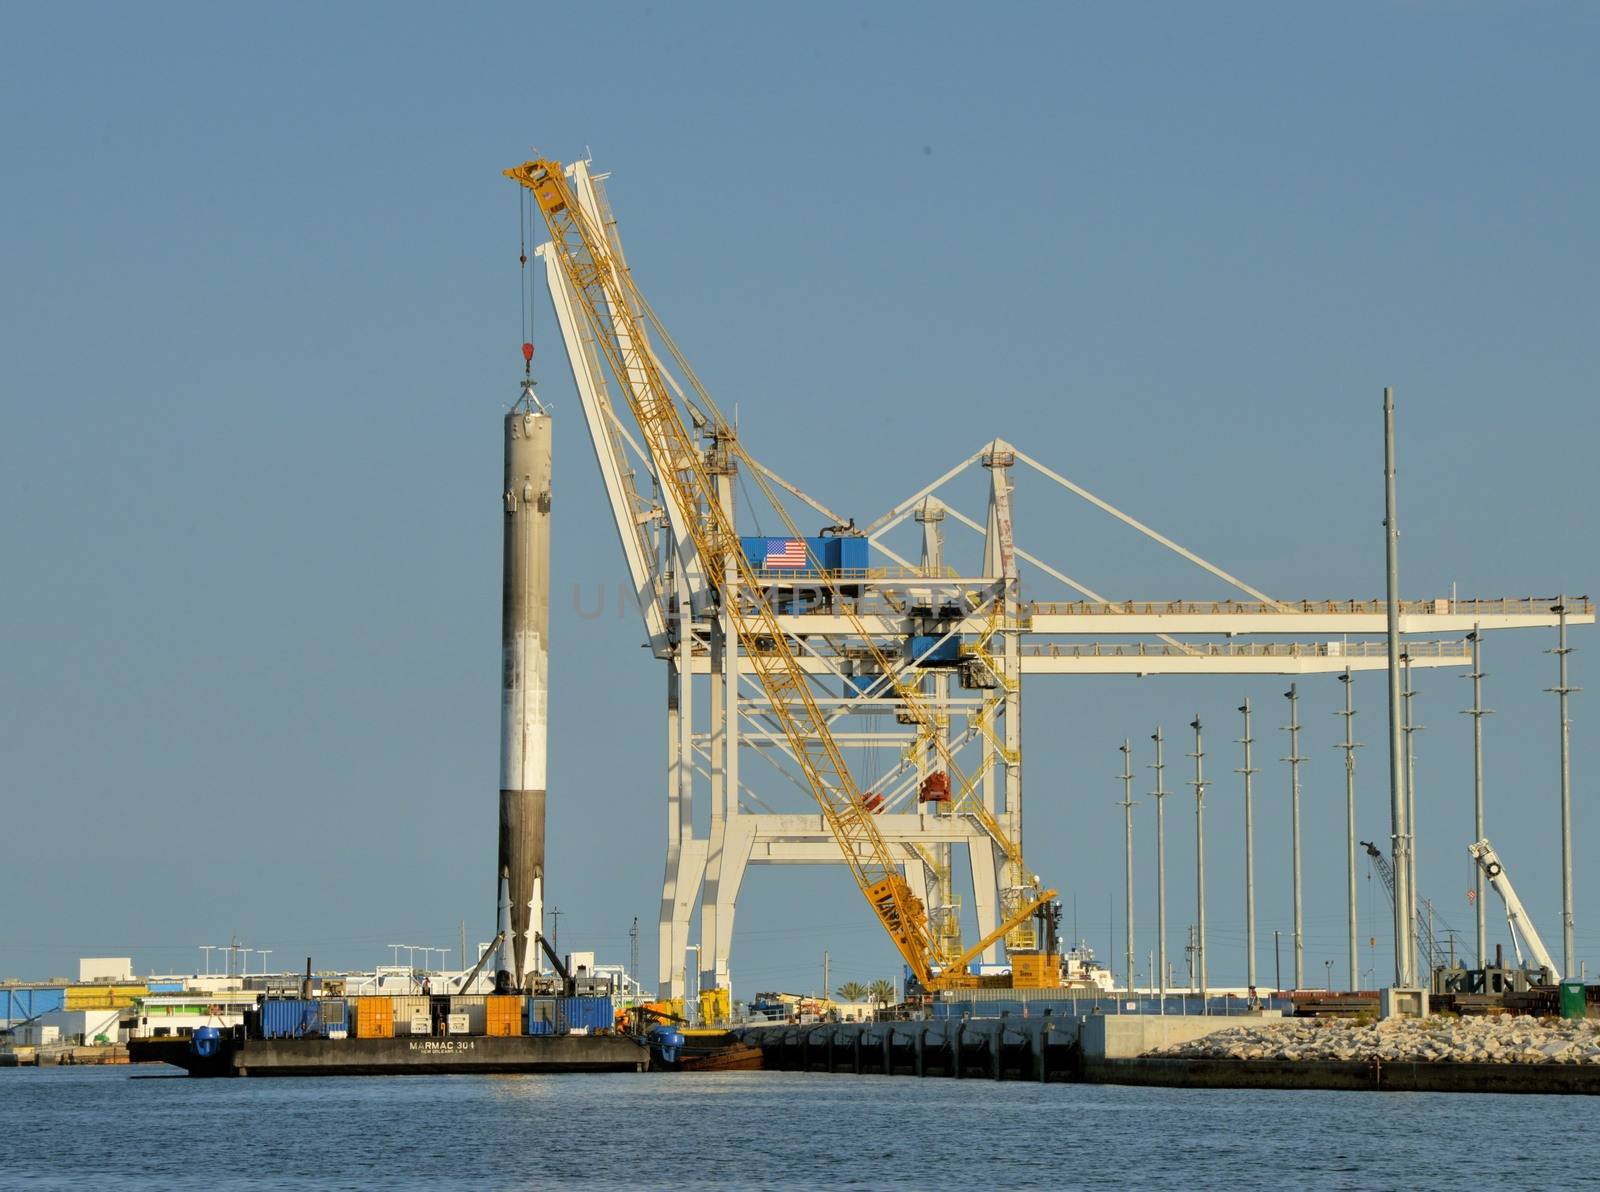 UNITED STATES, Port Canaveral: The first stage of a SpaceX Falcon 9 rocket is seen on the drone ship 'Of course I still love you' docked at Port Canaveral, on April 12, 2016, after its successful landing in the Atlantic Ocean.